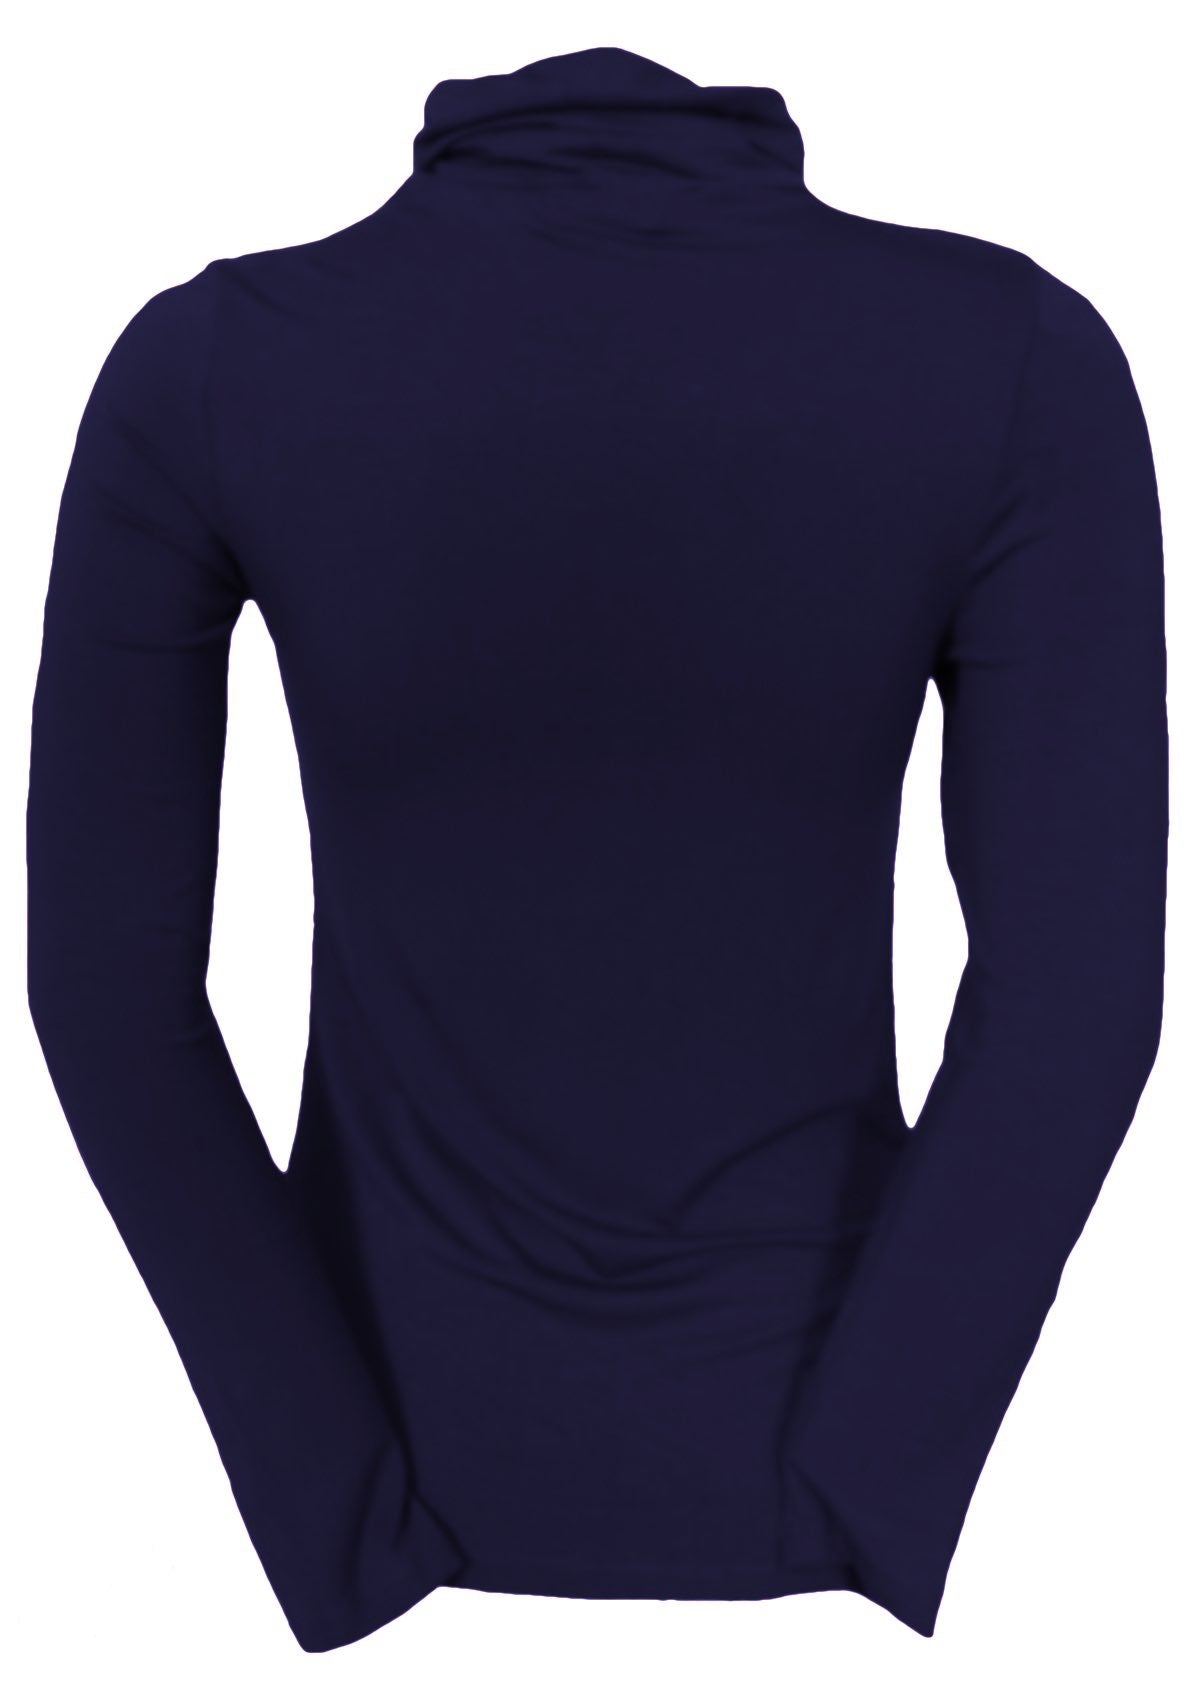 Back view of women's turtleneck navy blue fitted long sleeve soft stretch rayon top.